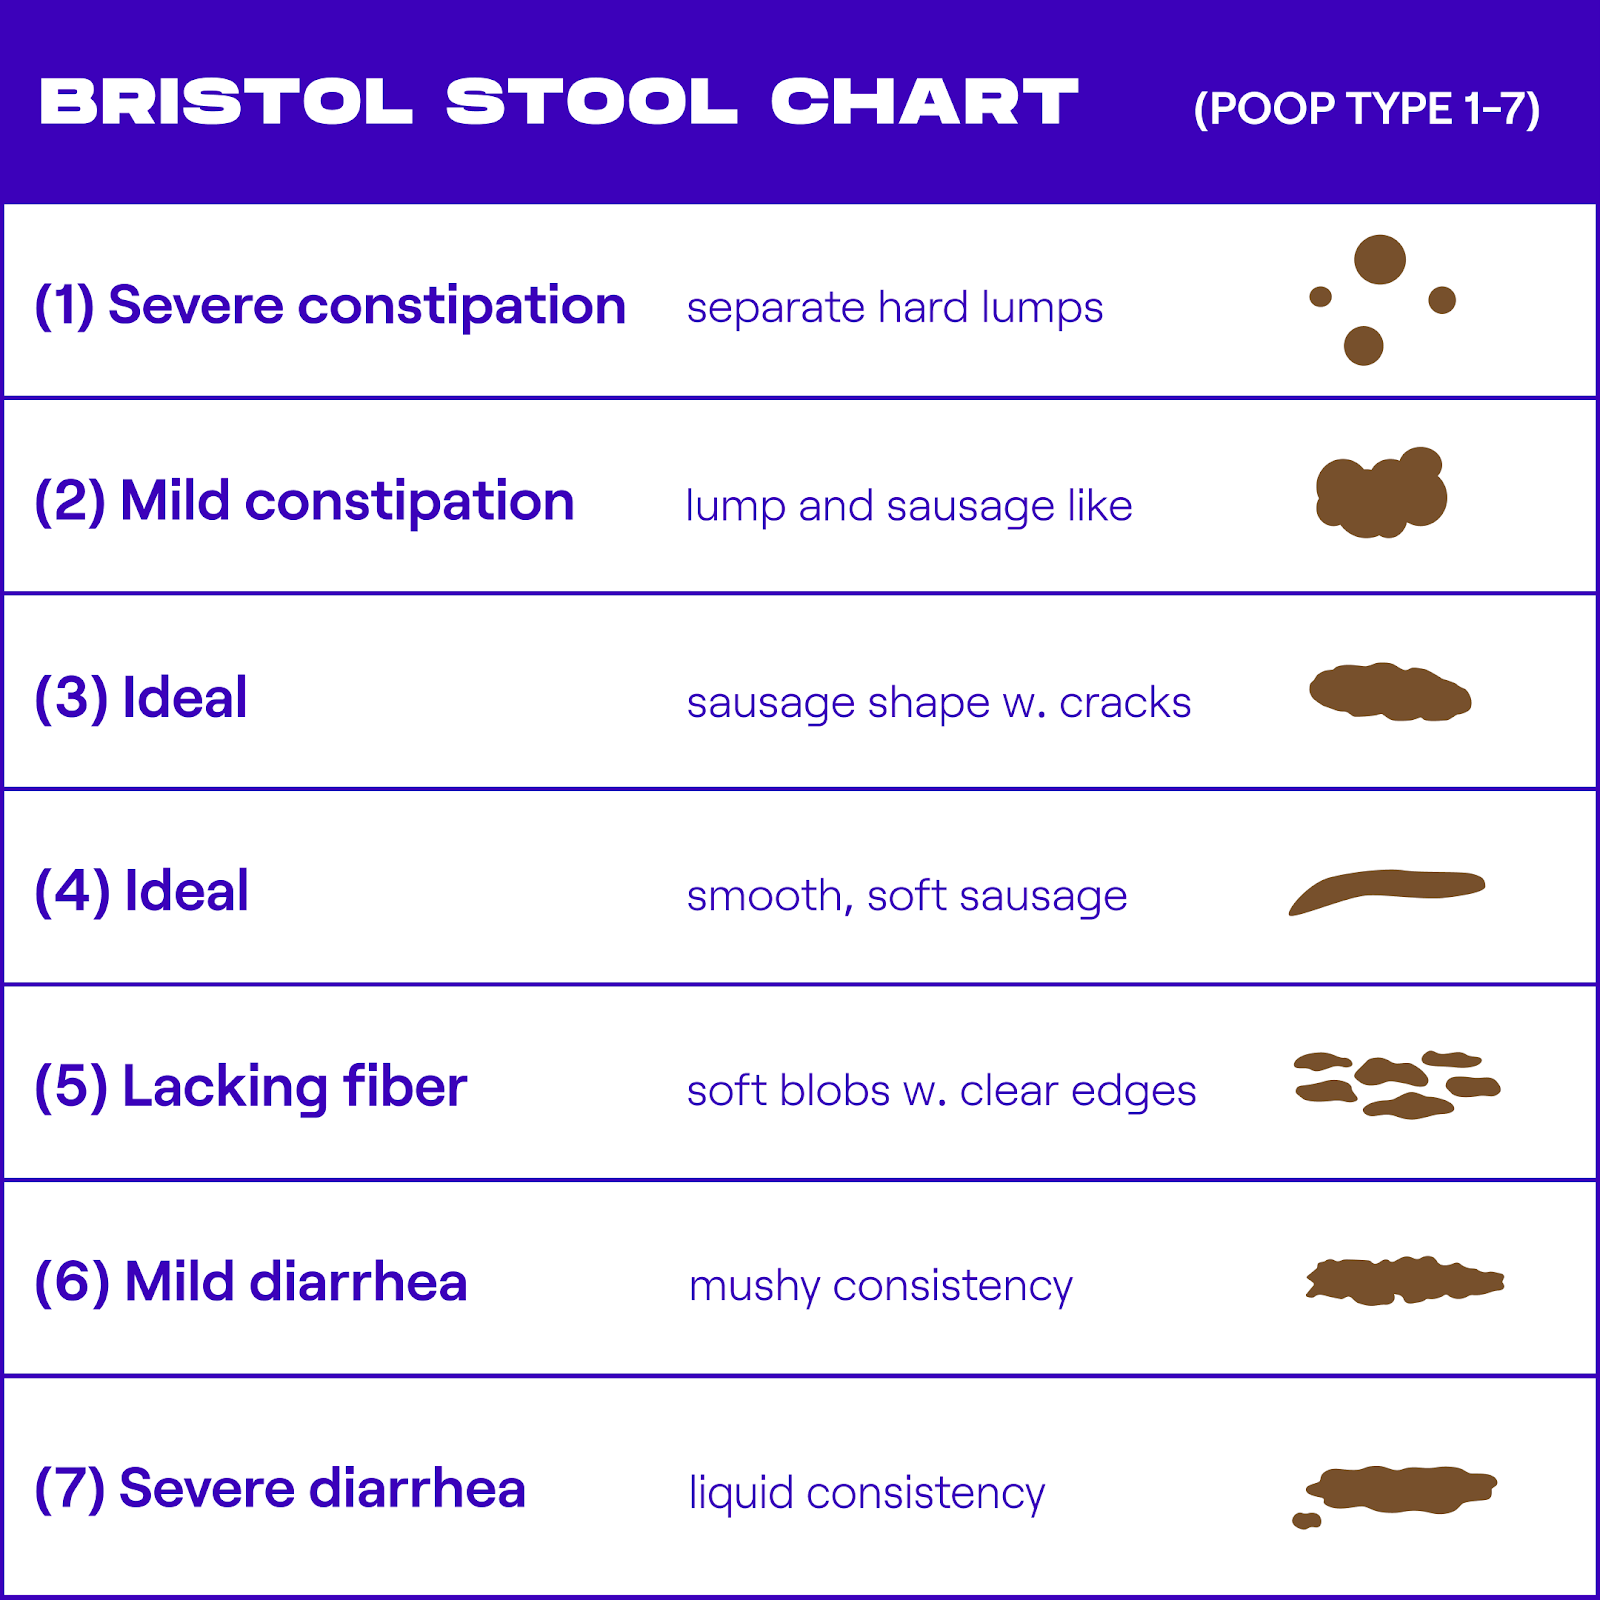 The Bristol Stool Chart, with descriptions from 1-7 of constipated to healthy bowel movements to diarrhea. 